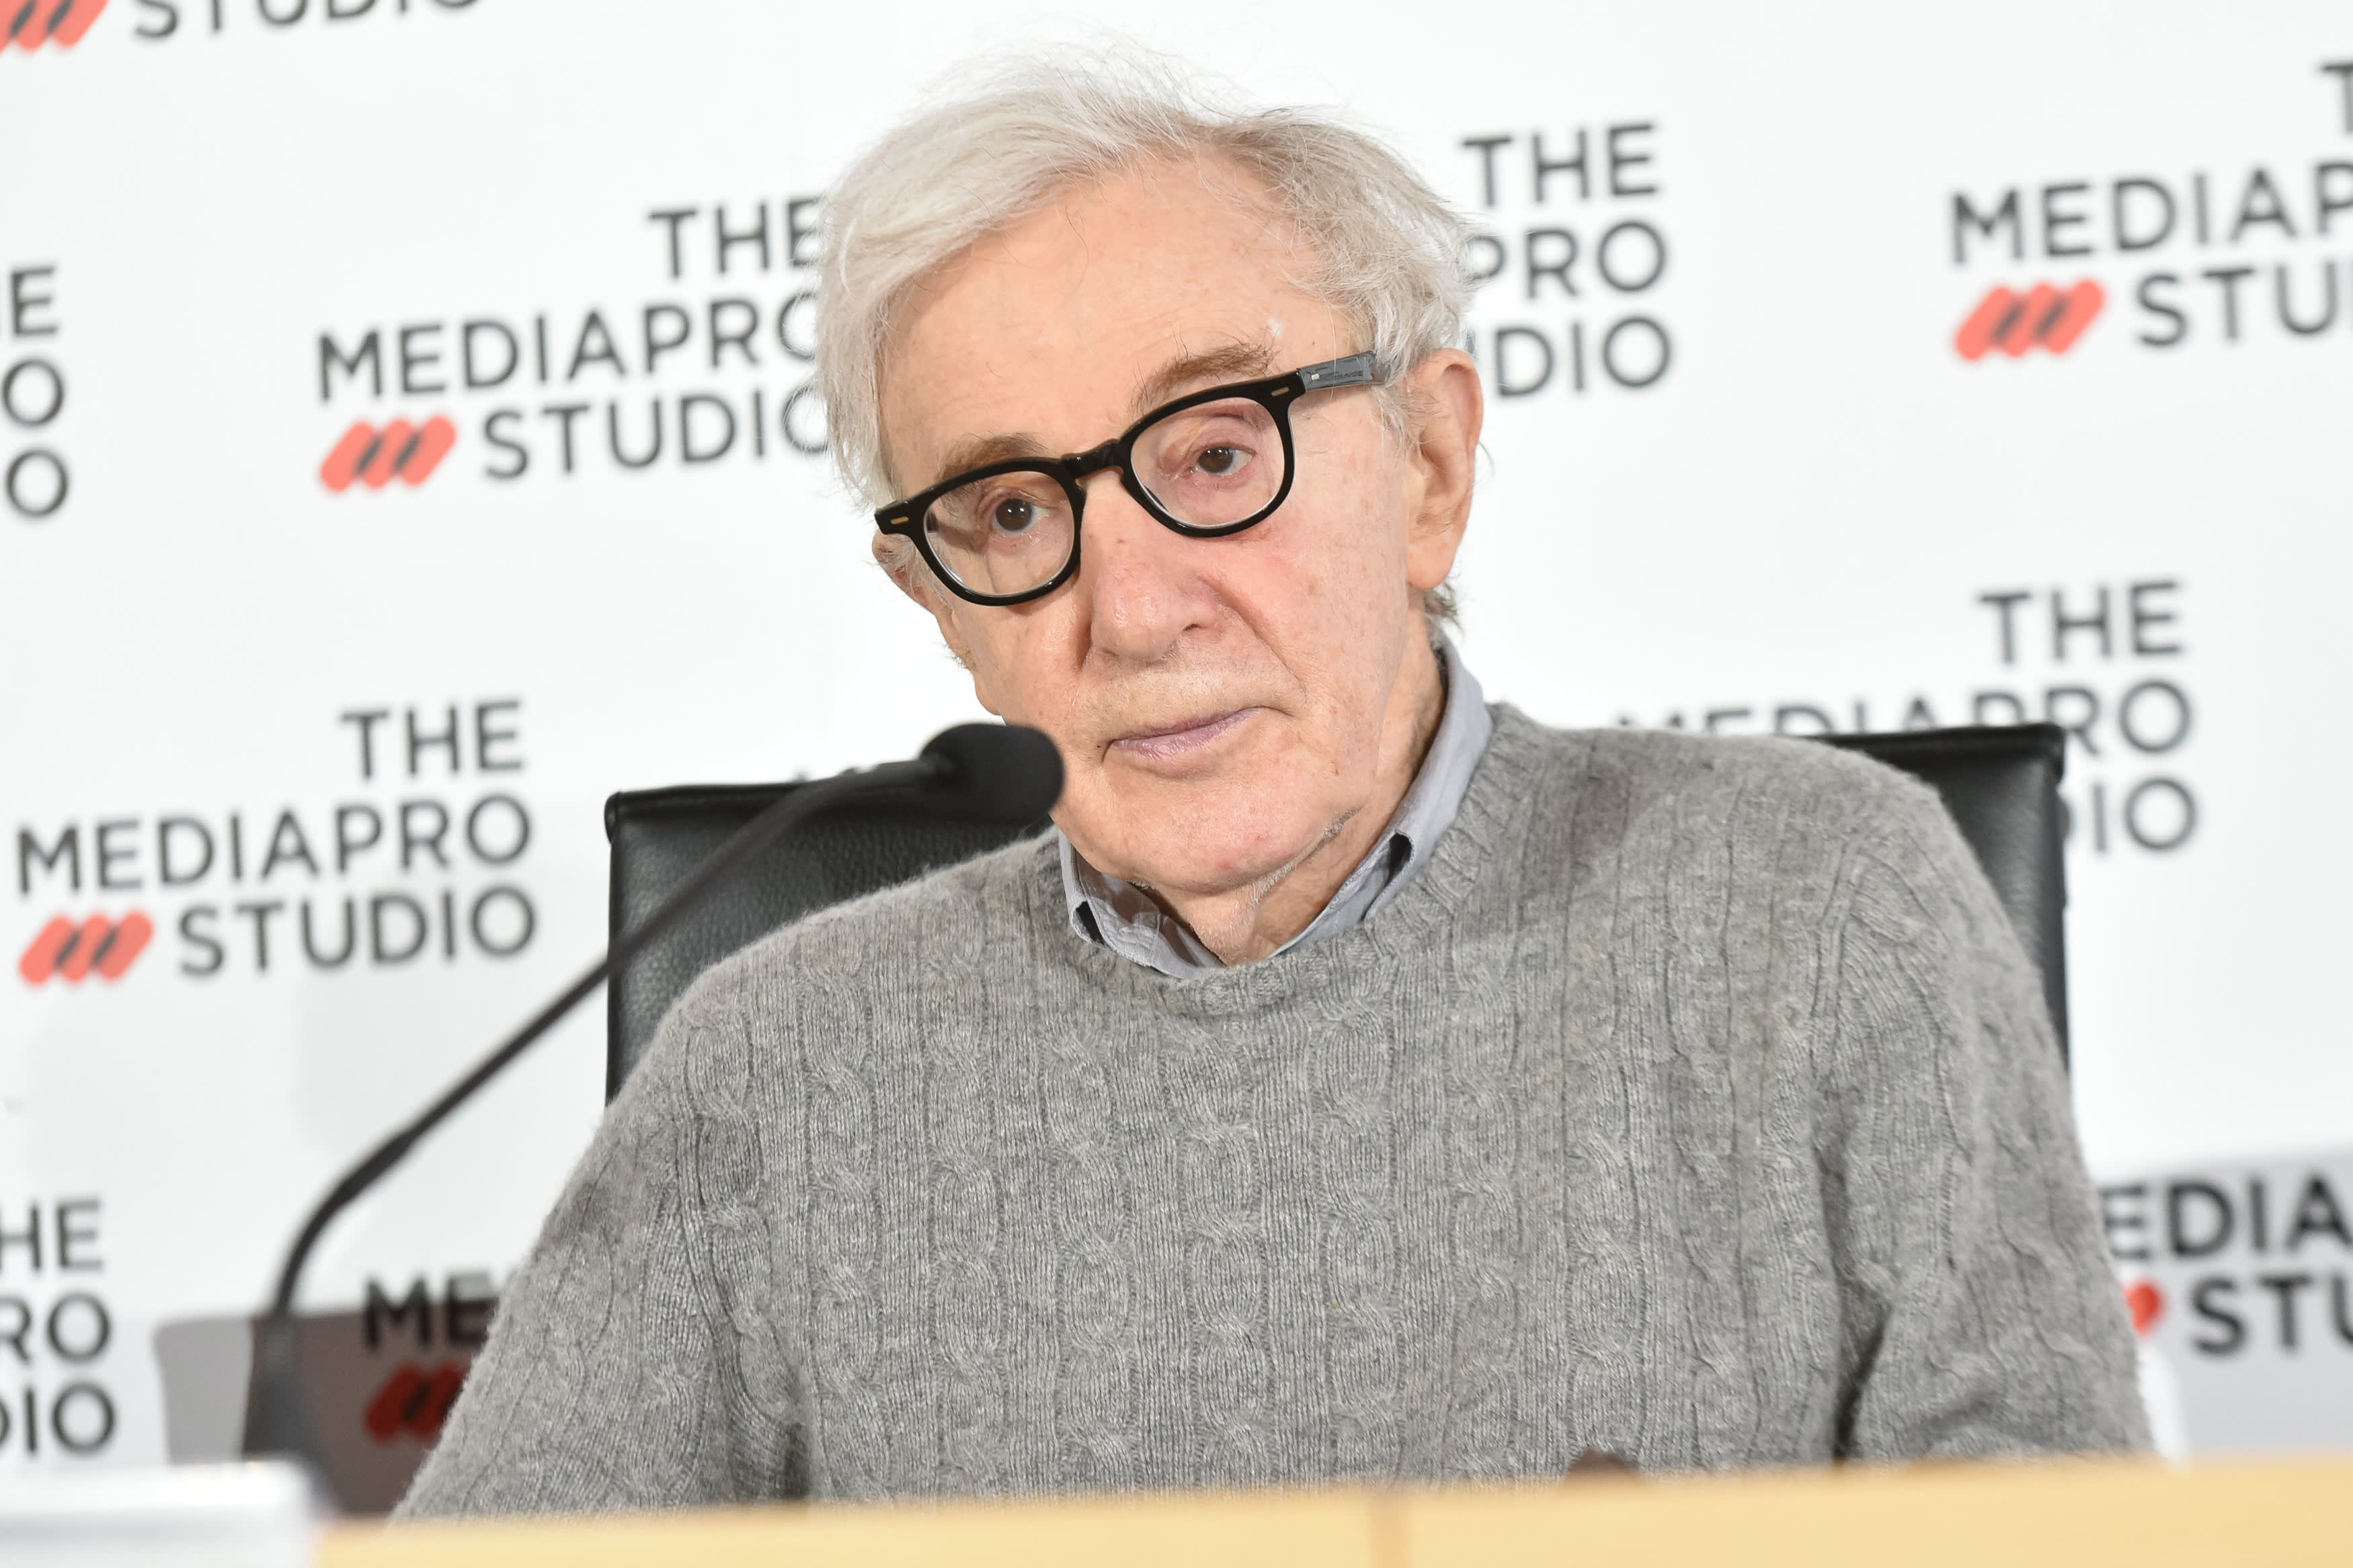 The documentary series Woody Allen is coming to HBO